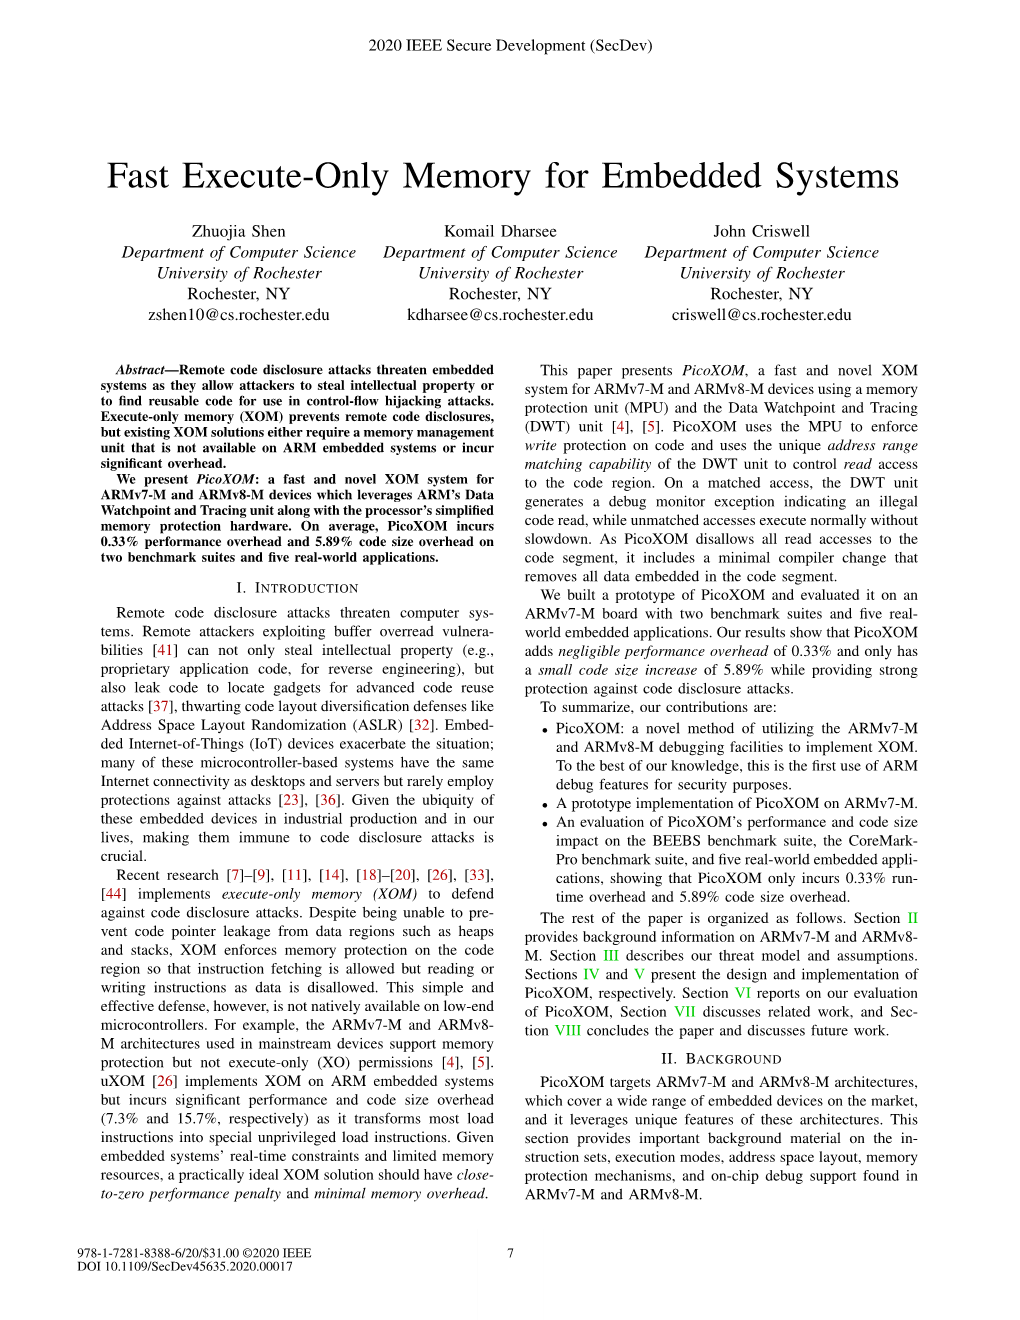 Fast Execute-Only Memory for Embedded Systems